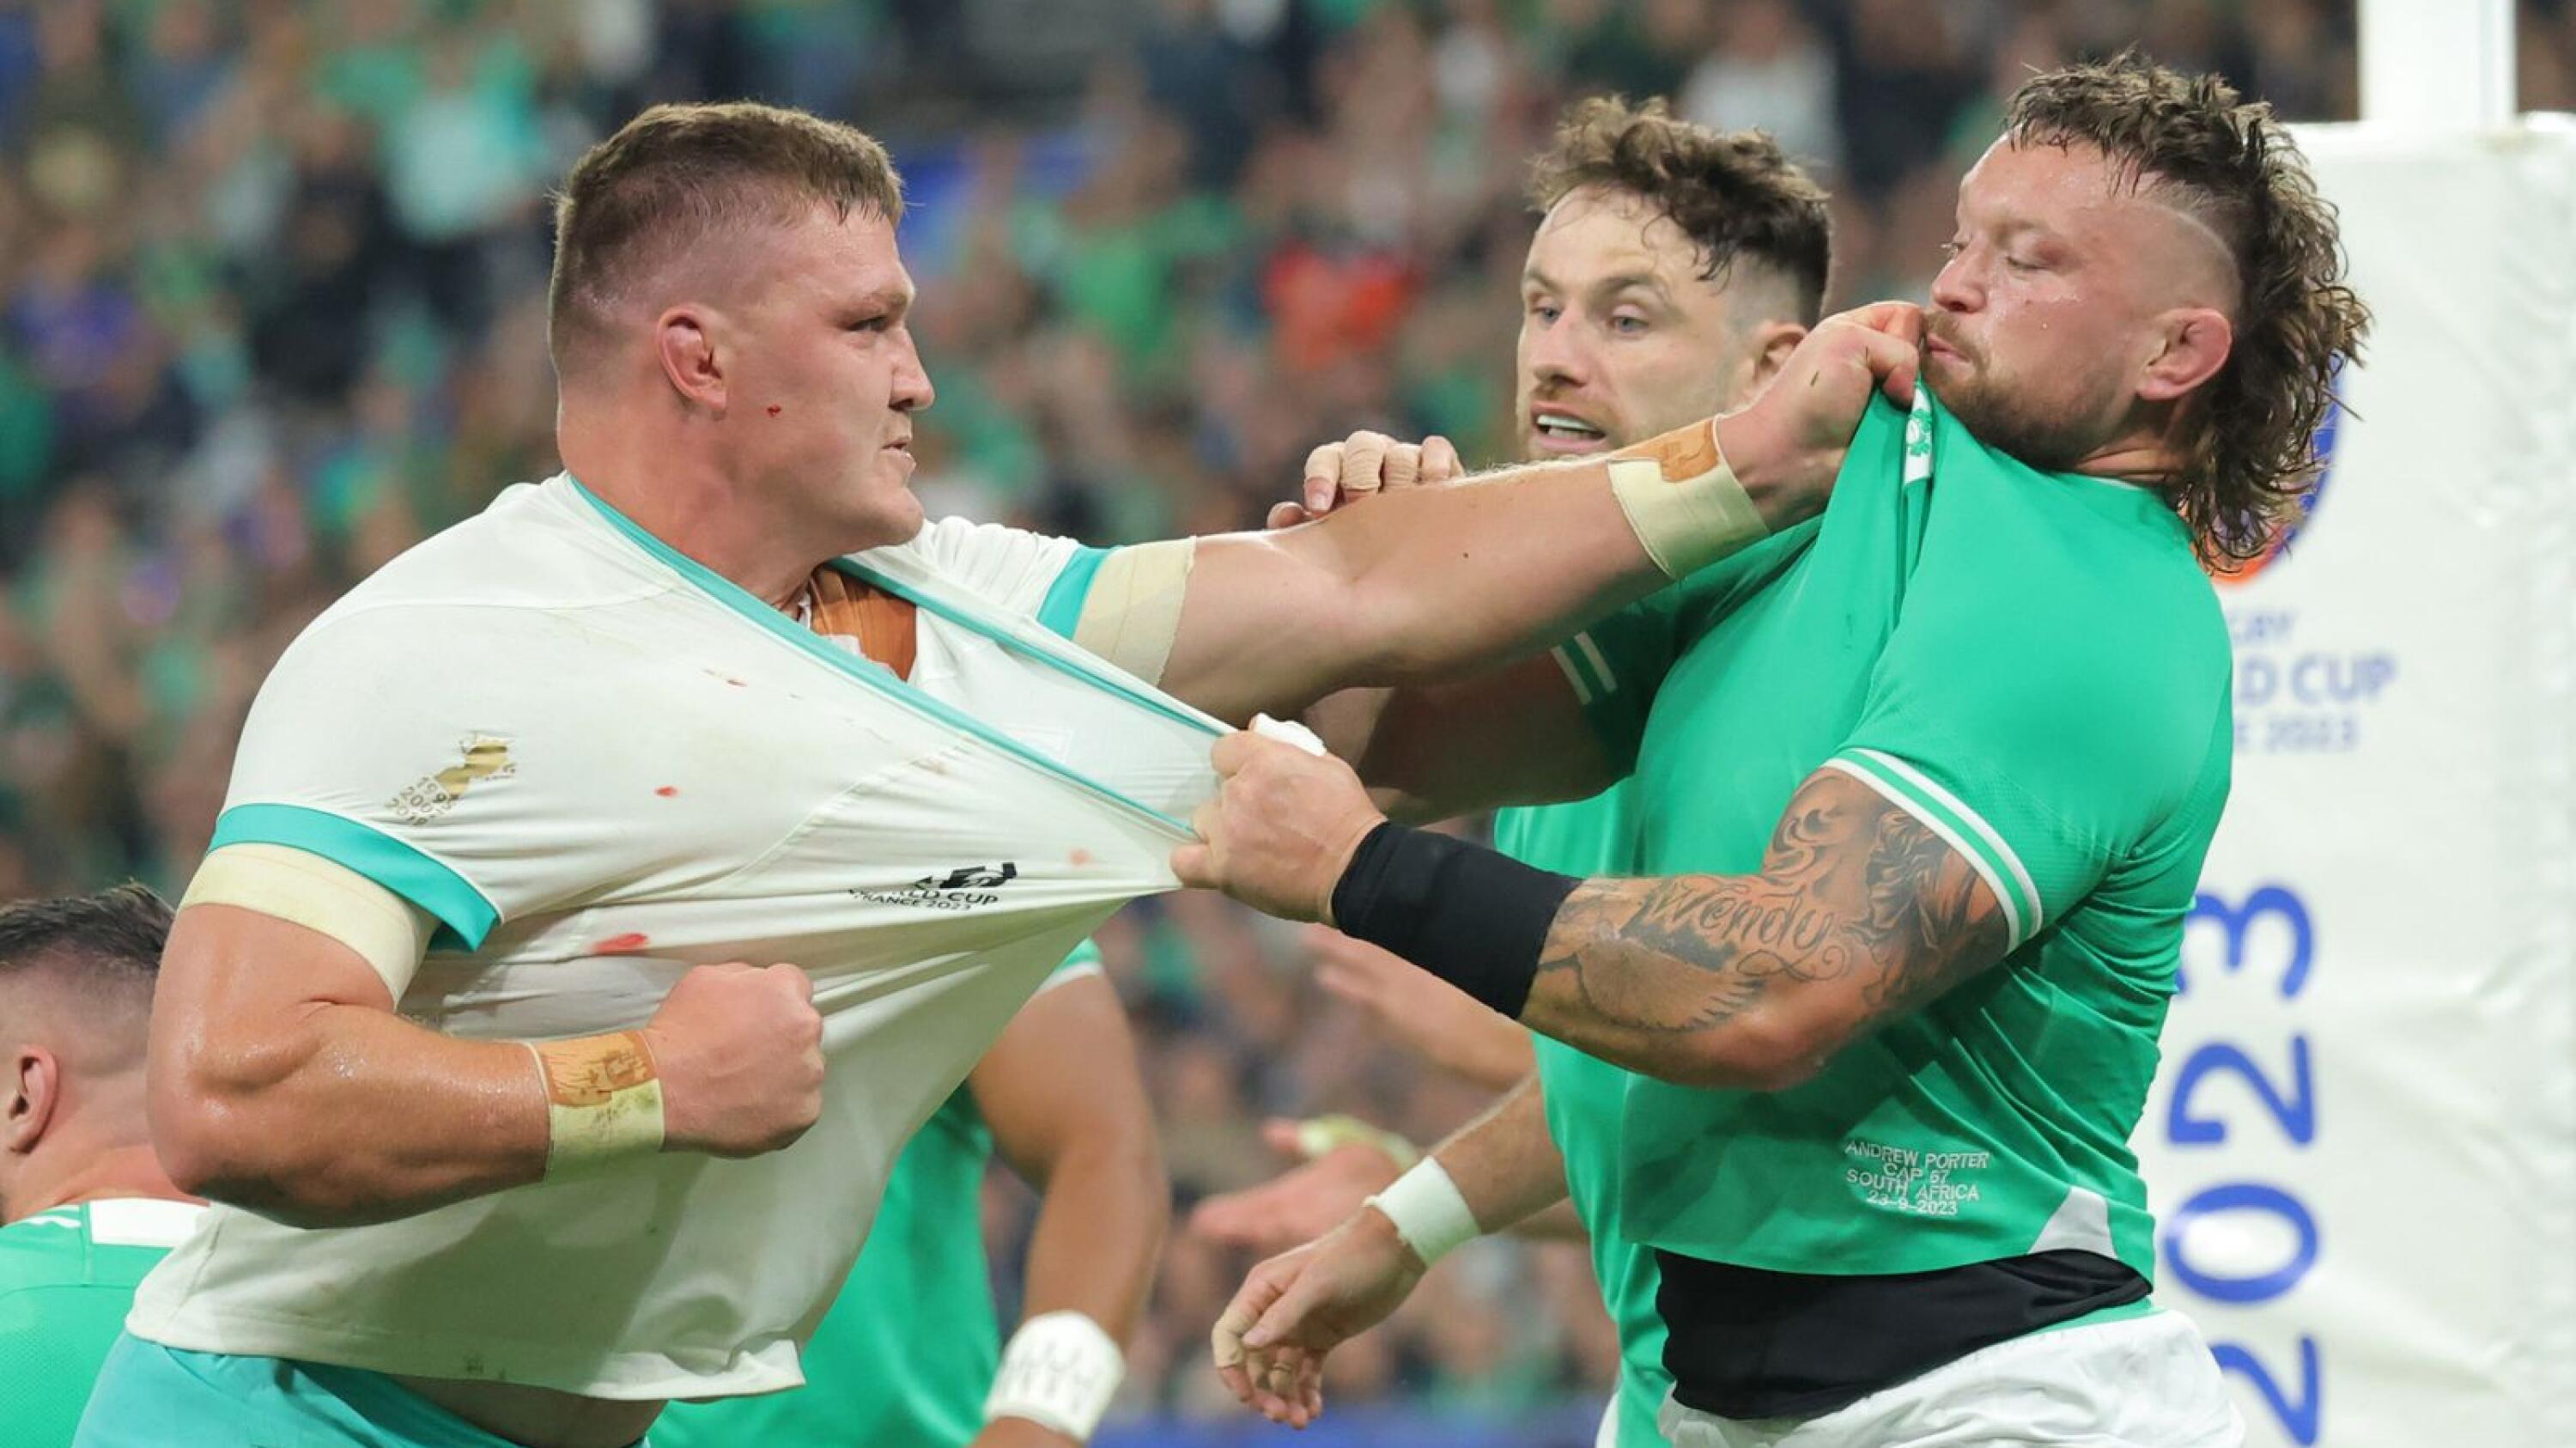 South Africa’s Jasper Wiese and Ireland’s Andrew Porter hold each other’s jersey during their Rugby World Cup Pool B match